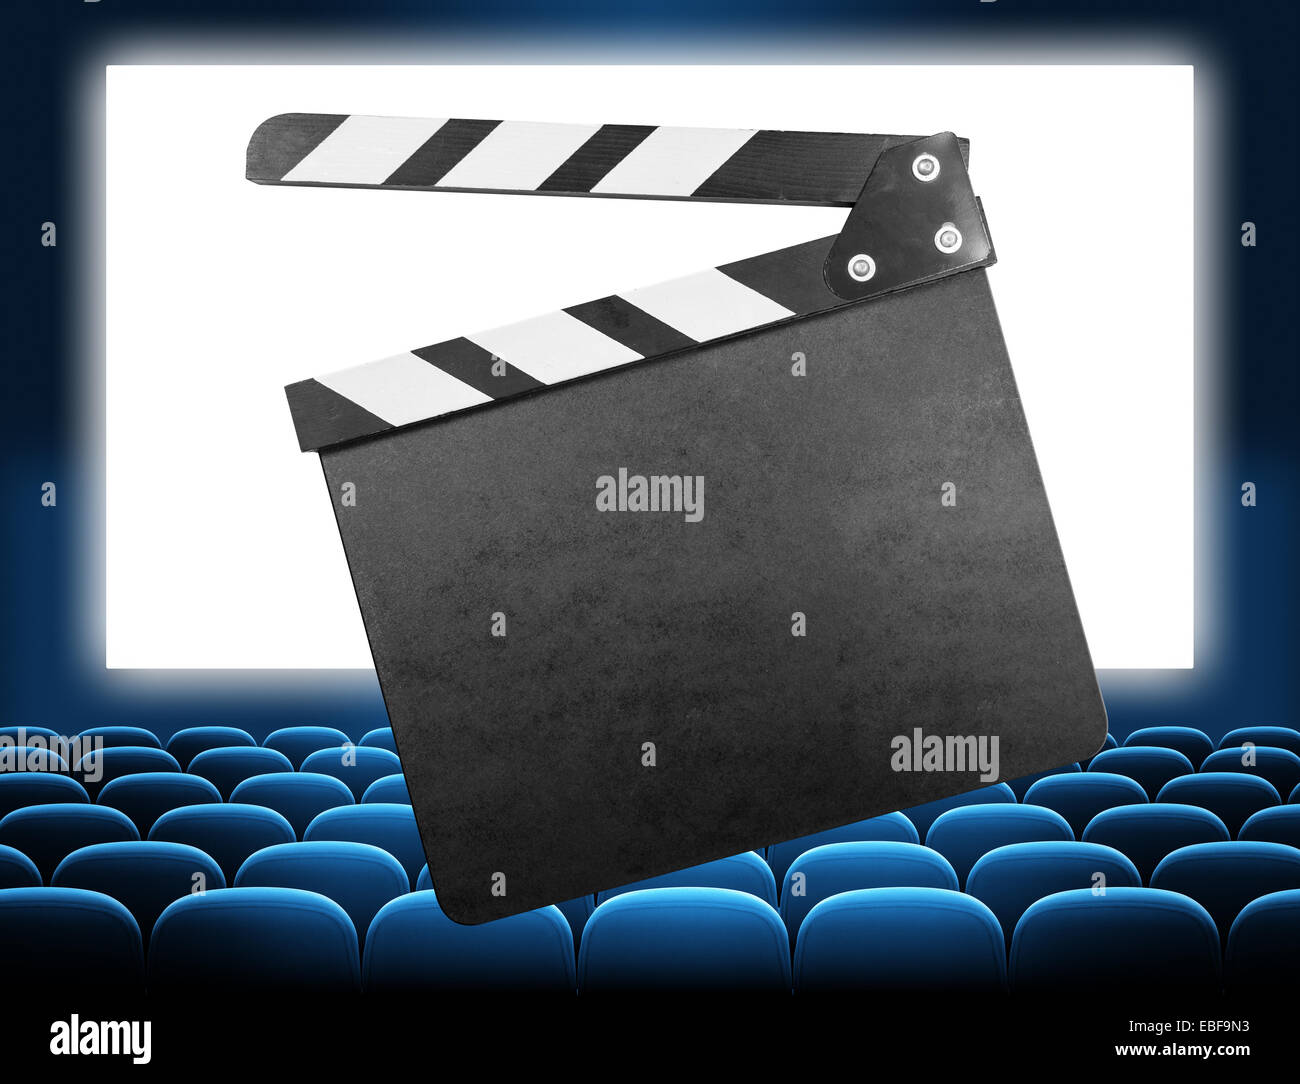 cinema clapper board on movie screen blue audience Stock Photo